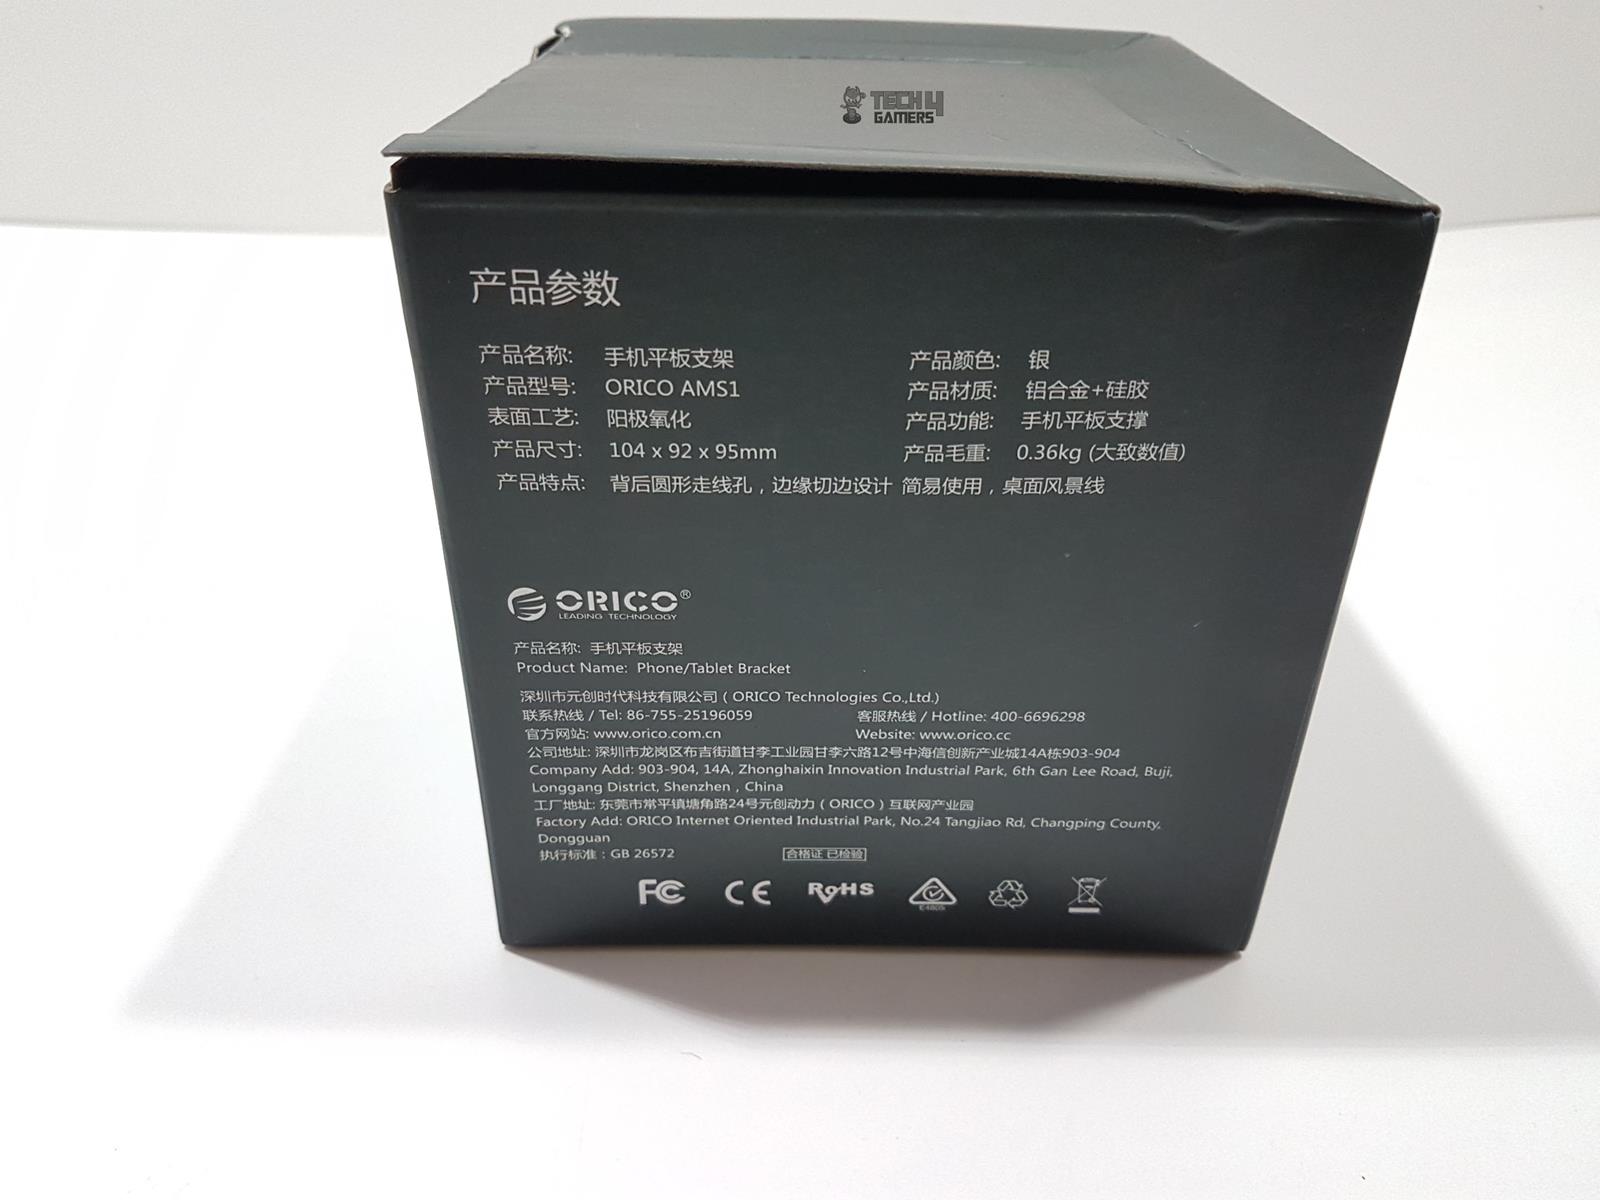 ORIC Packaging Box